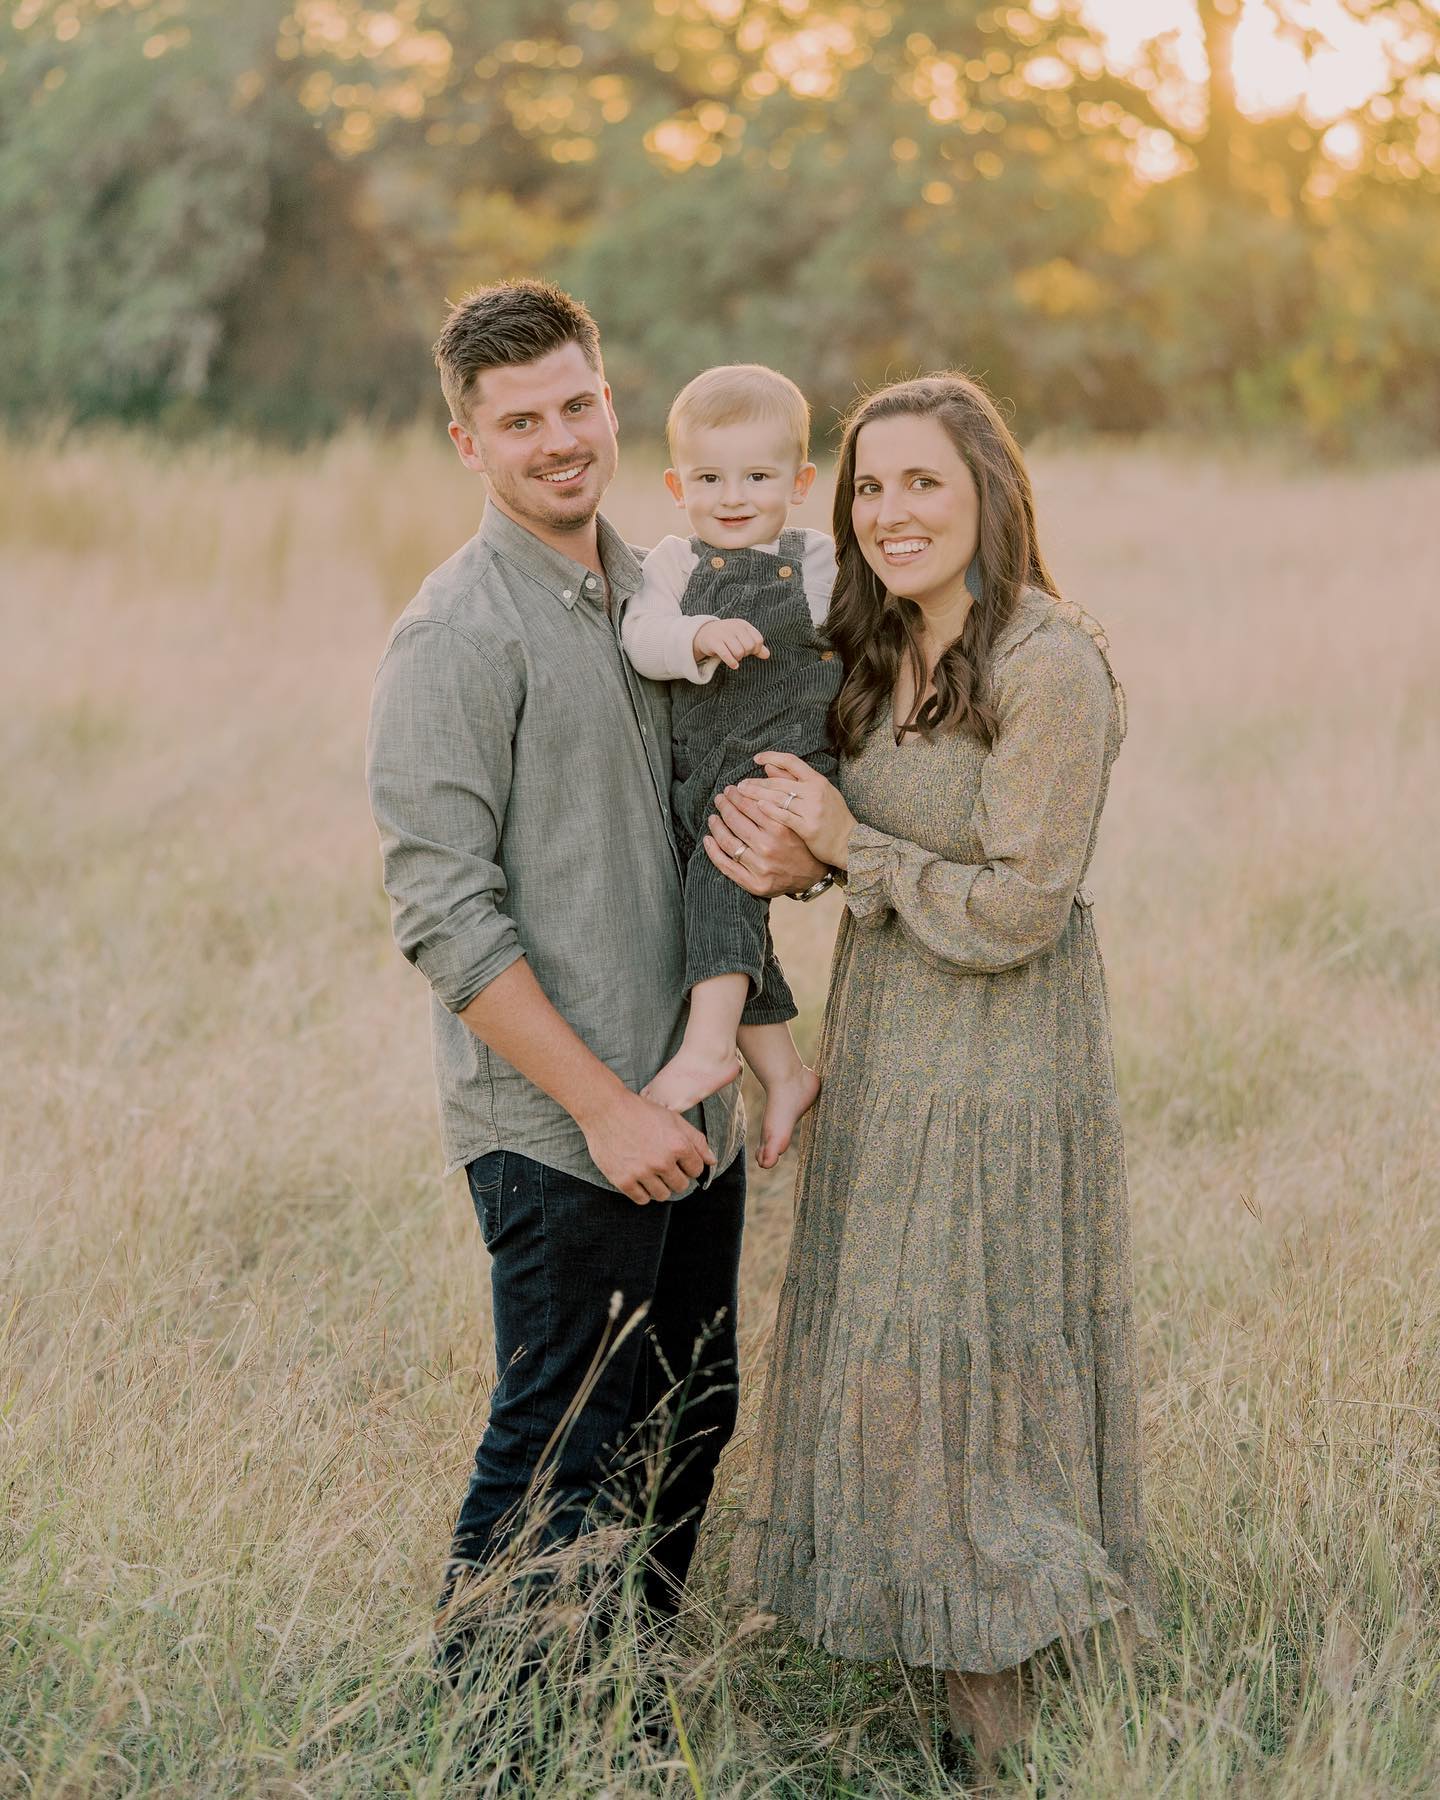 The cutest little fam featuring the most popular dress from the client closet last year for fall minis. I even wore it for our photos 🫣
.
.
Can’t wait to see what will take home the most worn prize this year.
.
What color combos are you planning for your family’s fall photos this year?
.
.
.
.
.#dallasnewbornphotographer
#richardsonnewbornphotographer
#lakewoodnewbornphotographer
#rockwallfamilyphotographer
#planofamilyphotographer
#lakehighlandsnewbornphotographer
#cedarhillnewbornphotographer
#farmersbranchnewbornphotographer
#dfwnewbornphotographer #planofamilyphotographer
#richardsonfamilyphotographer
#rockwallfamilyphotographer
#dallasfamilyphotographer #thefountcollective
#100layercakelet #lemonadeandlenses
#themotherhoodanthology #fortworthphotographer
#heartfulphotogs #richardsonfamilyphotographer #arlingtonfamilyphotographer